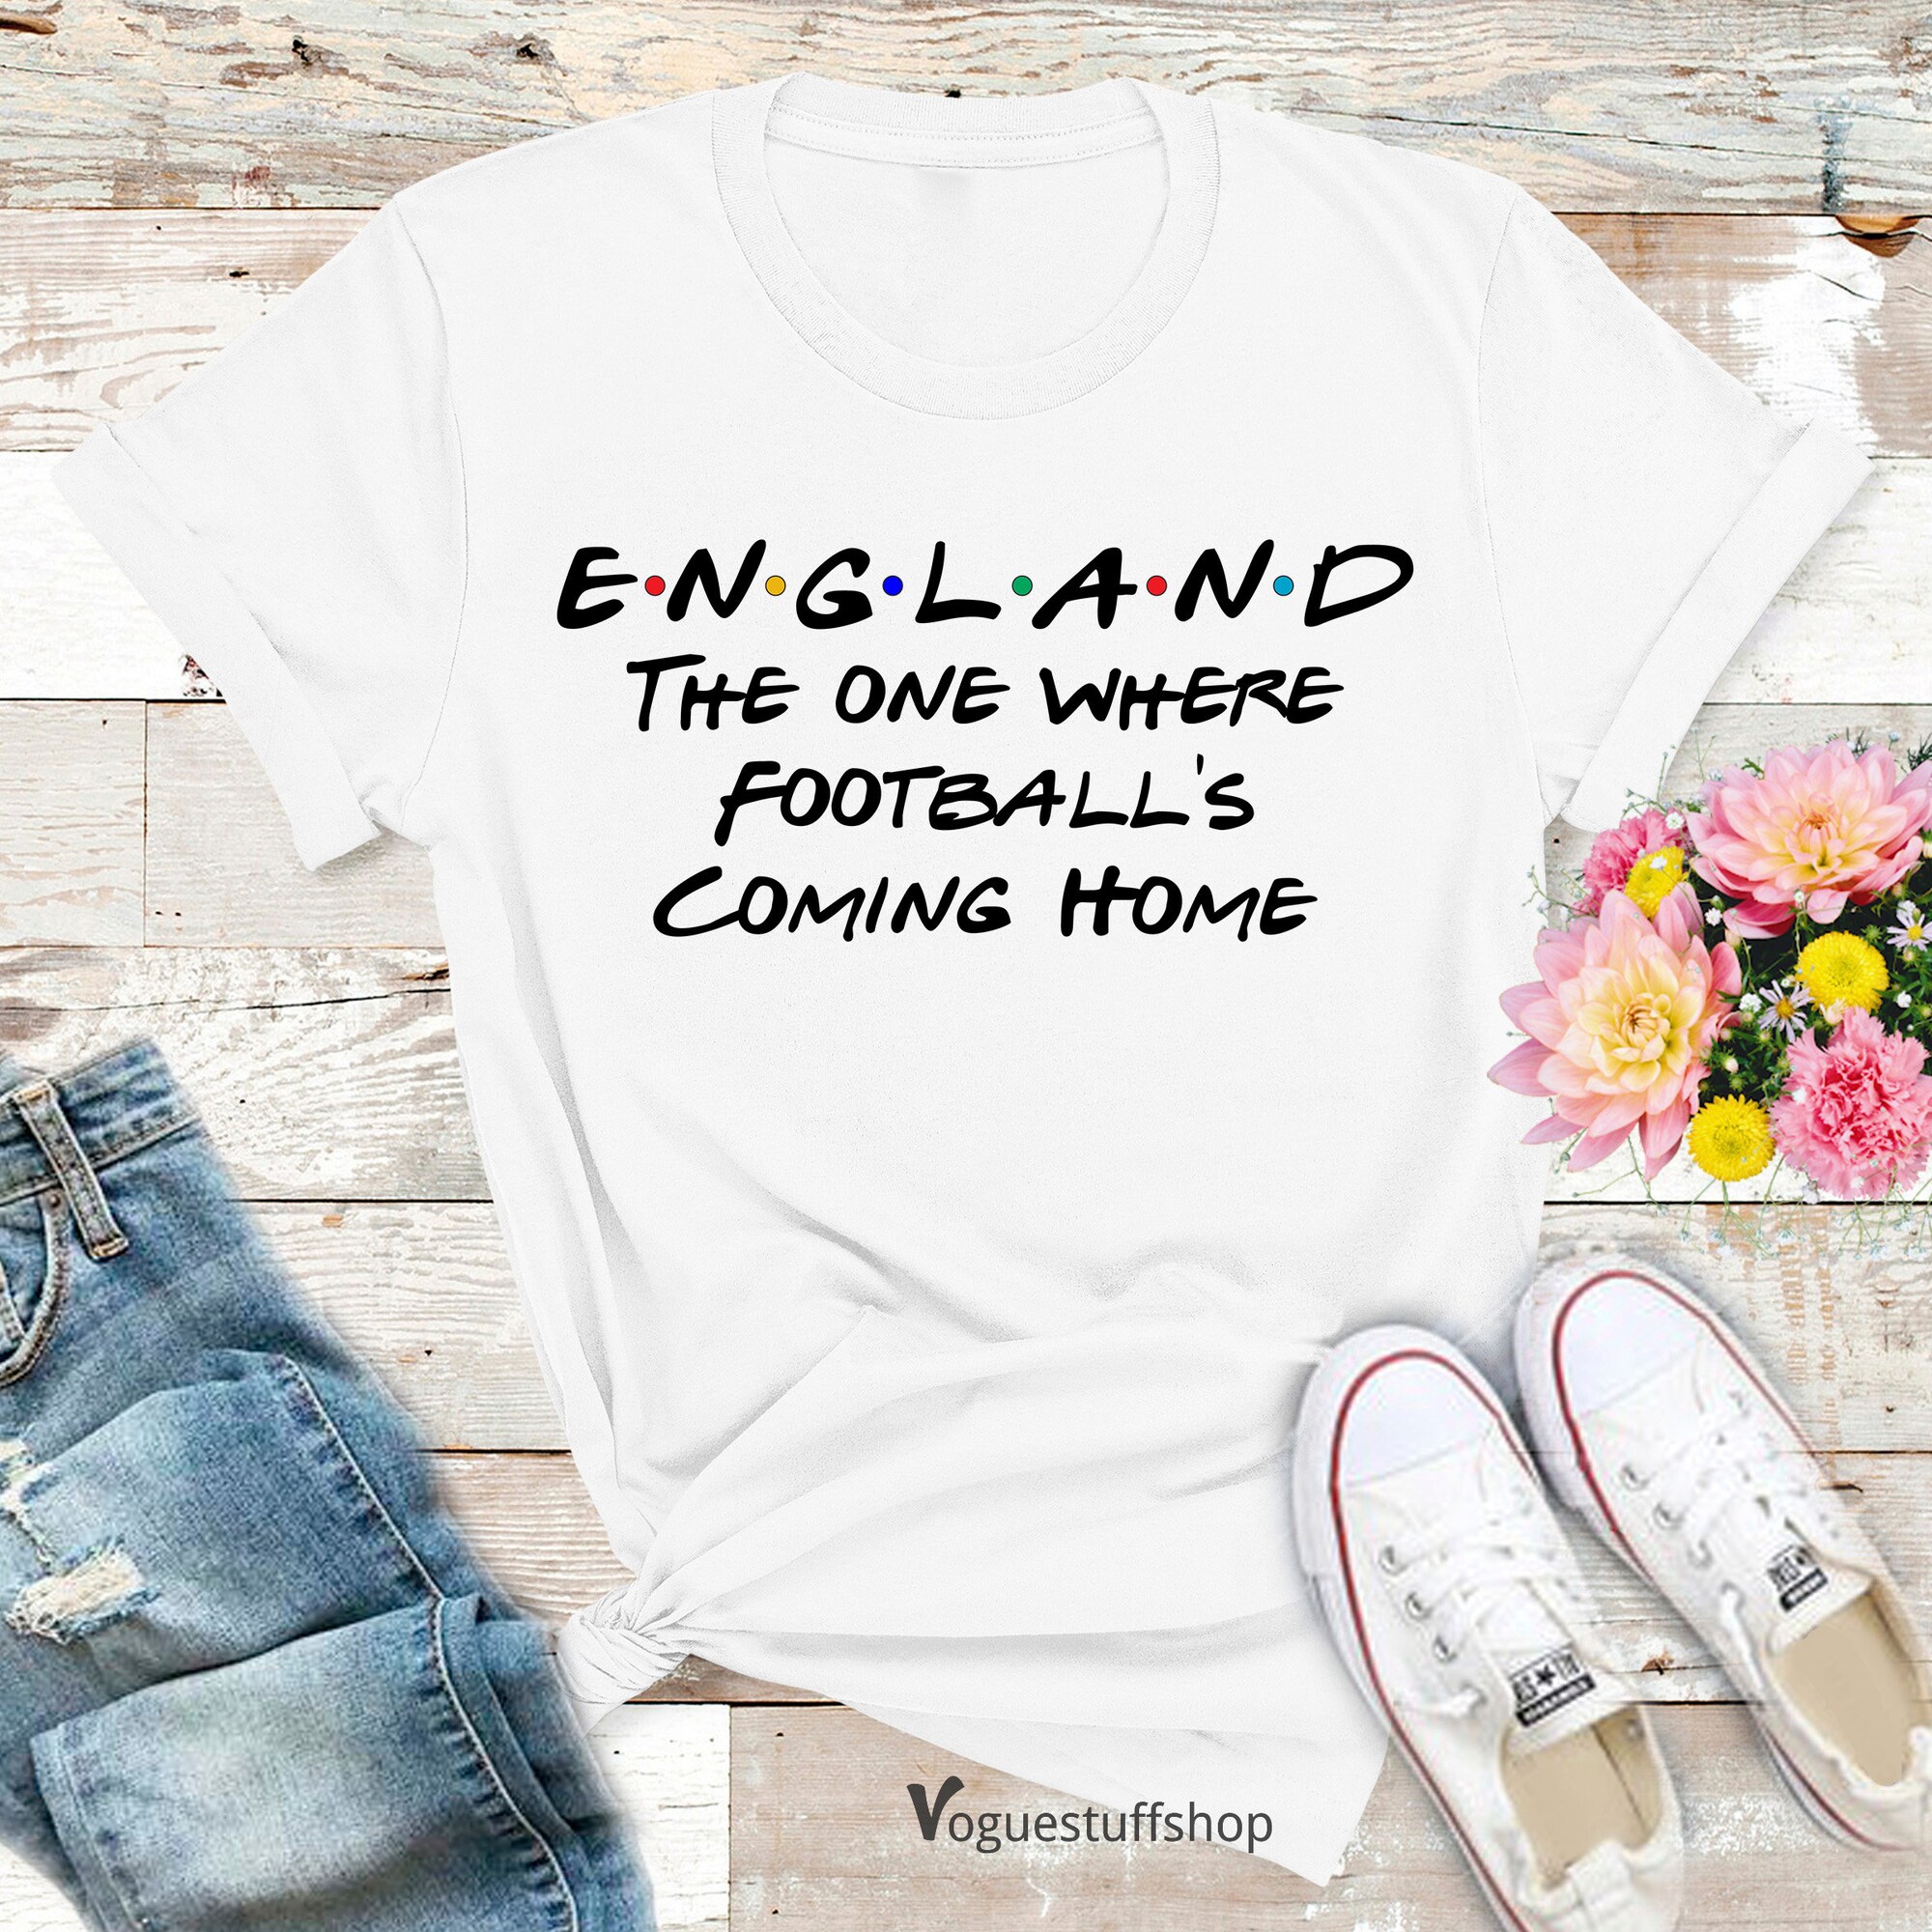 Discover England Football T Shirts The One Where Football Coming Home T Shirt Women Girls Footballer Friends Gift Patriotic England Sports Tshirt